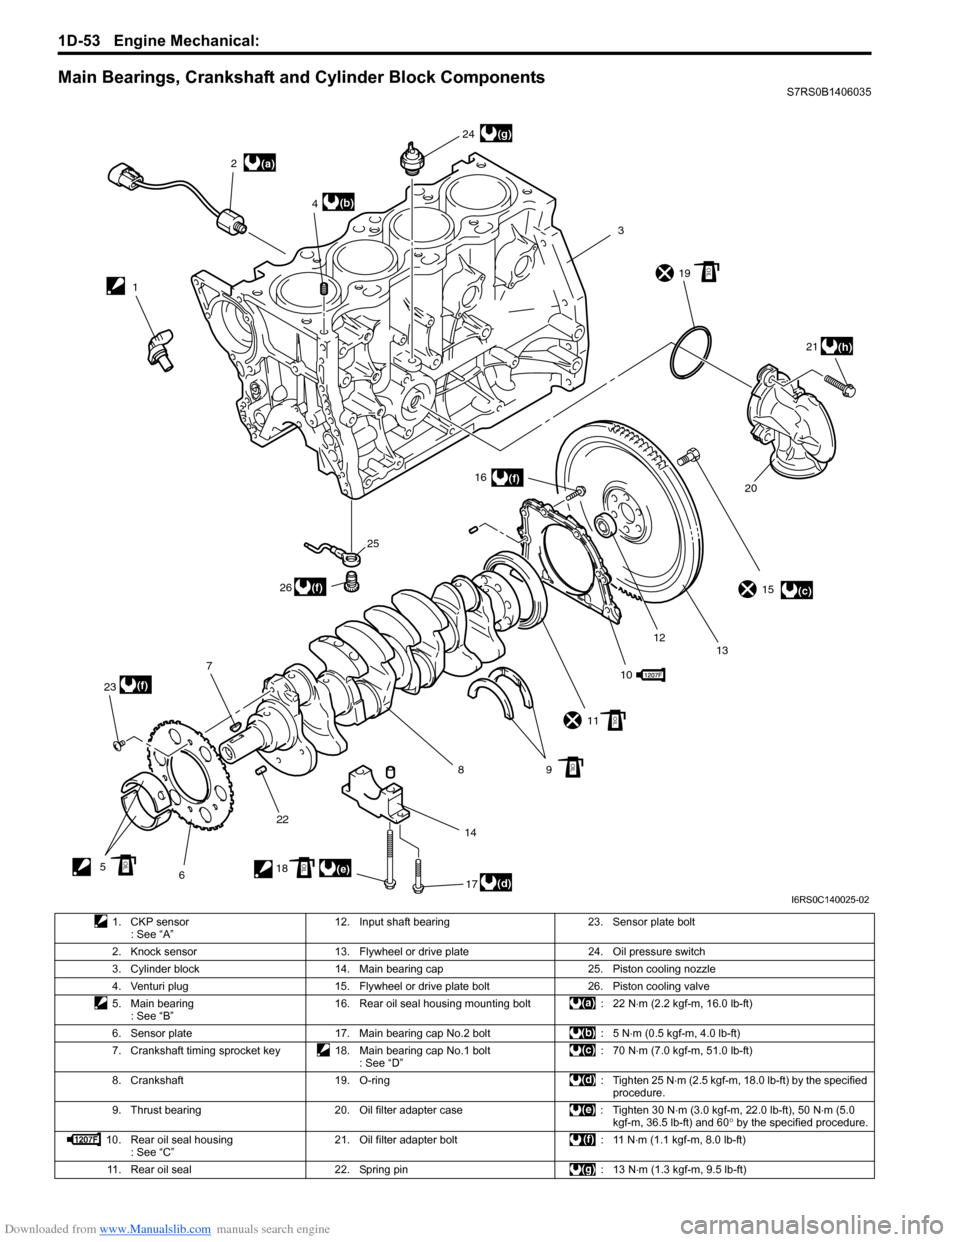 SUZUKI SWIFT 2005 2.G Service Workshop Manual Downloaded from www.Manualslib.com manuals search engine 1D-53 Engine Mechanical: 
Main Bearings, Crankshaft and Cylinder Block ComponentsS7RS0B1406035
(a)
(c)
(d)(e)
(b)
(f)
(f)
(f)
(g)
(h)
12
3
4
5 